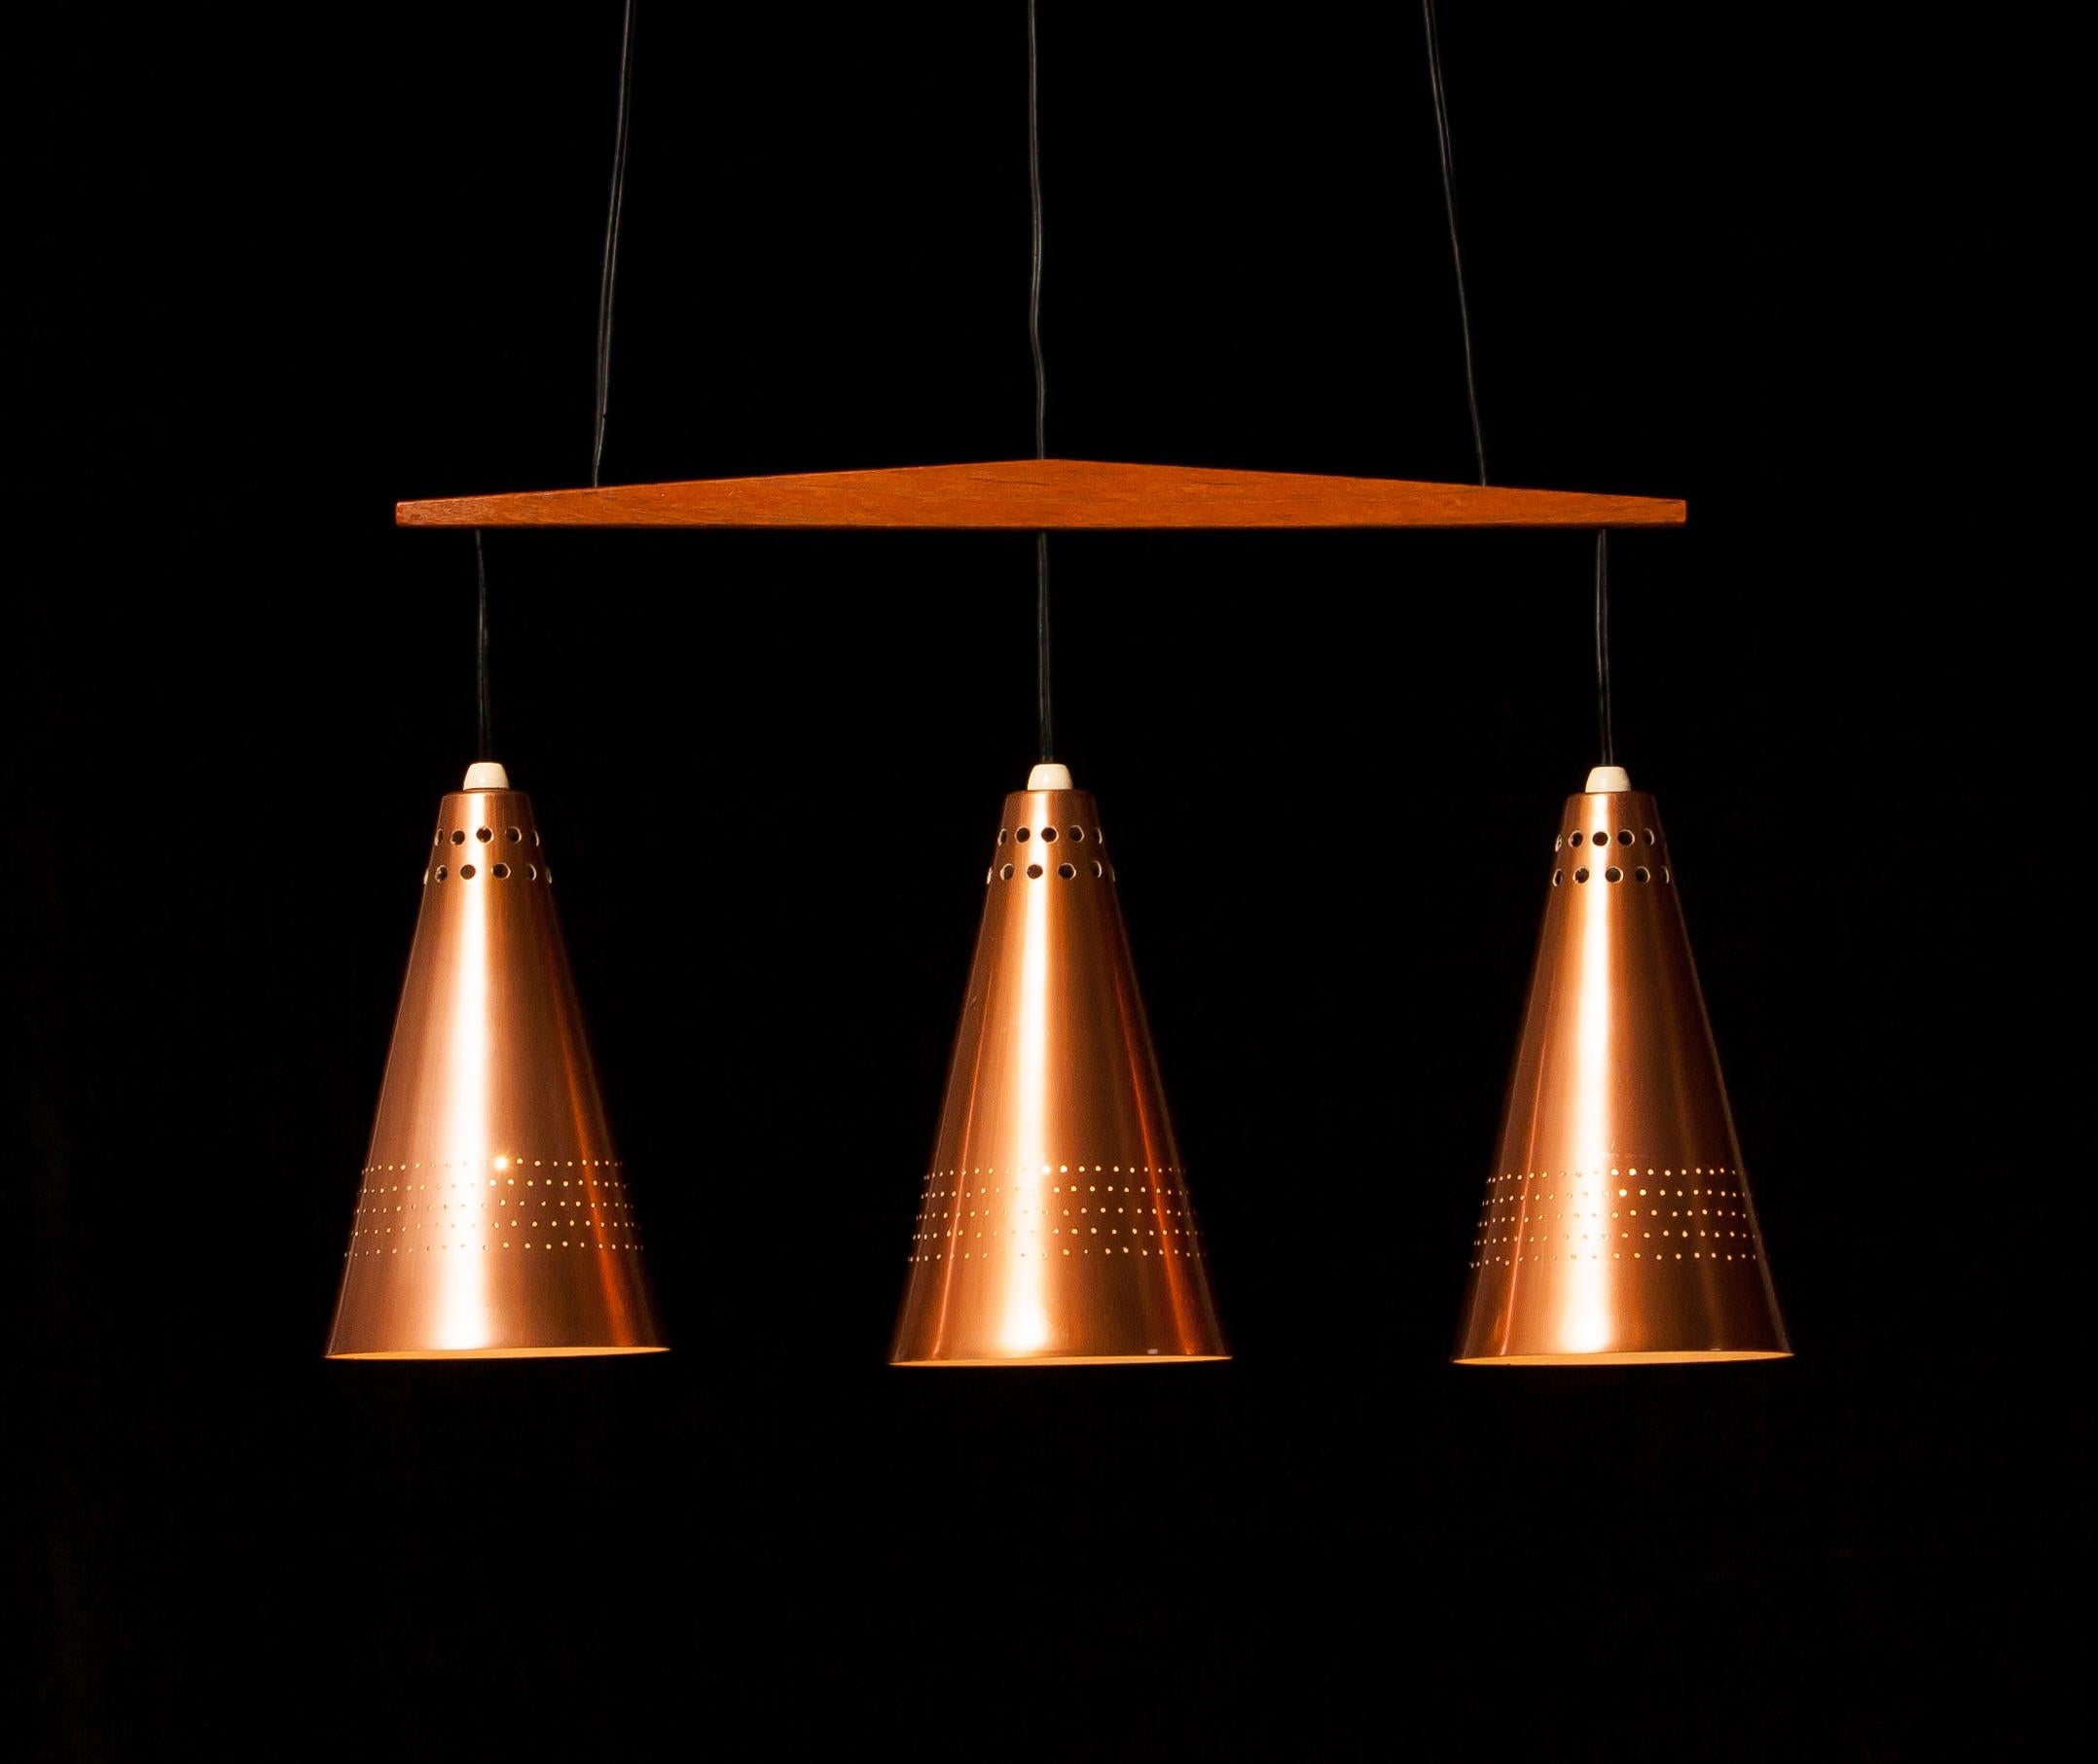 Beautiful lamp designed by Hans-Agne Jakobsson, Sweden.
This pendant is made of three perforated copper shades with a teak stretcher.
It is adjustable in height.
The lamp is in a very nice condition.
Period, 1950s
Dimensions: H 130 cm, W 58 cm,